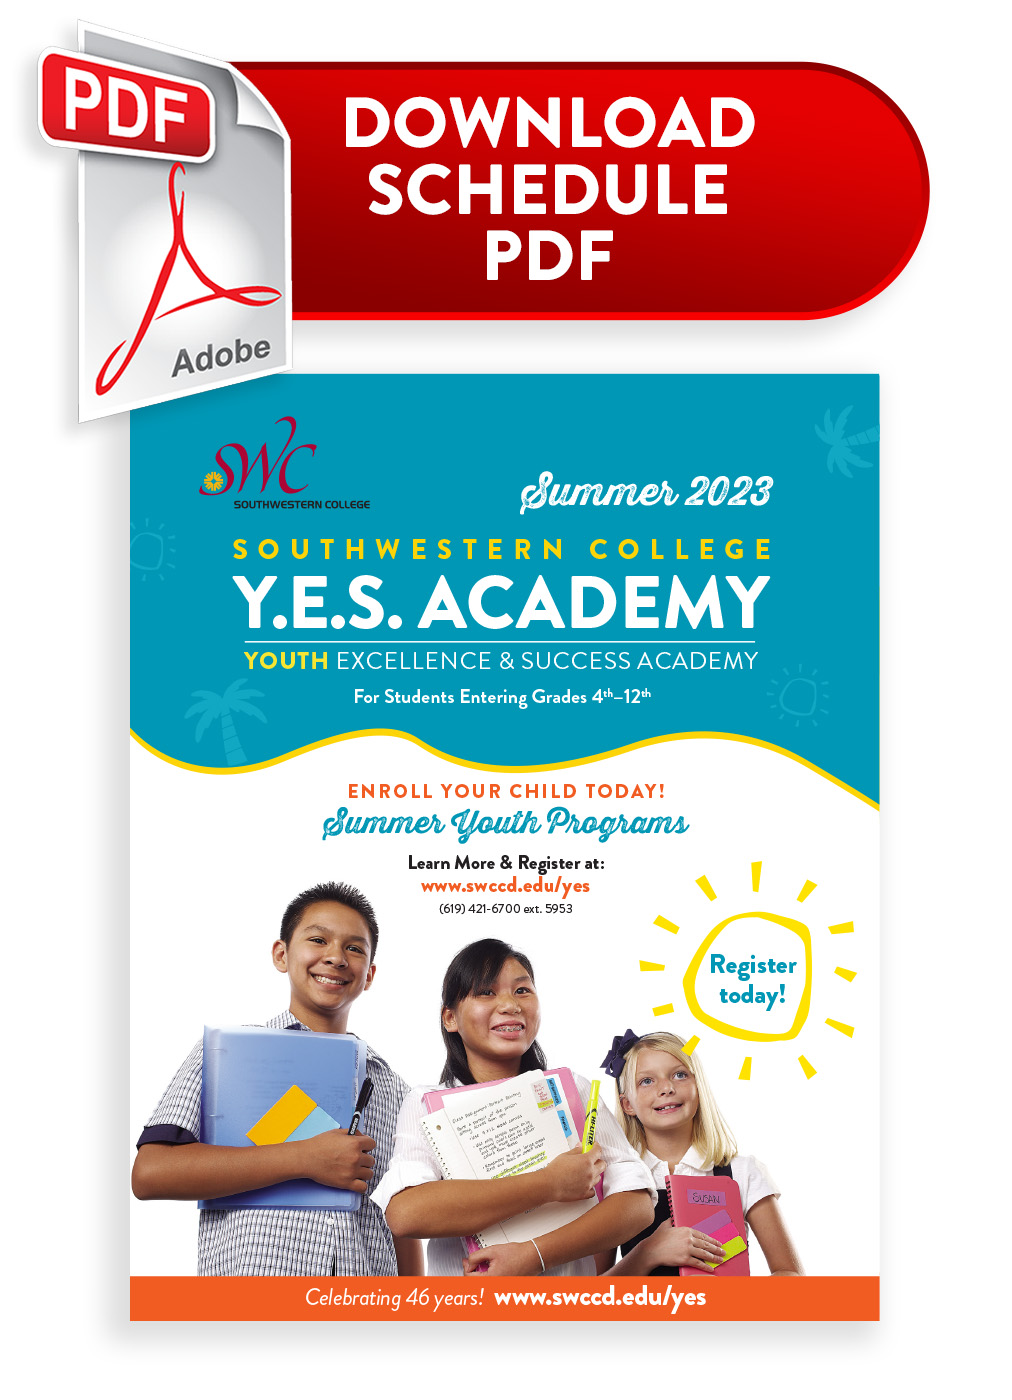 Y.E.S. academy Schedule in PDF